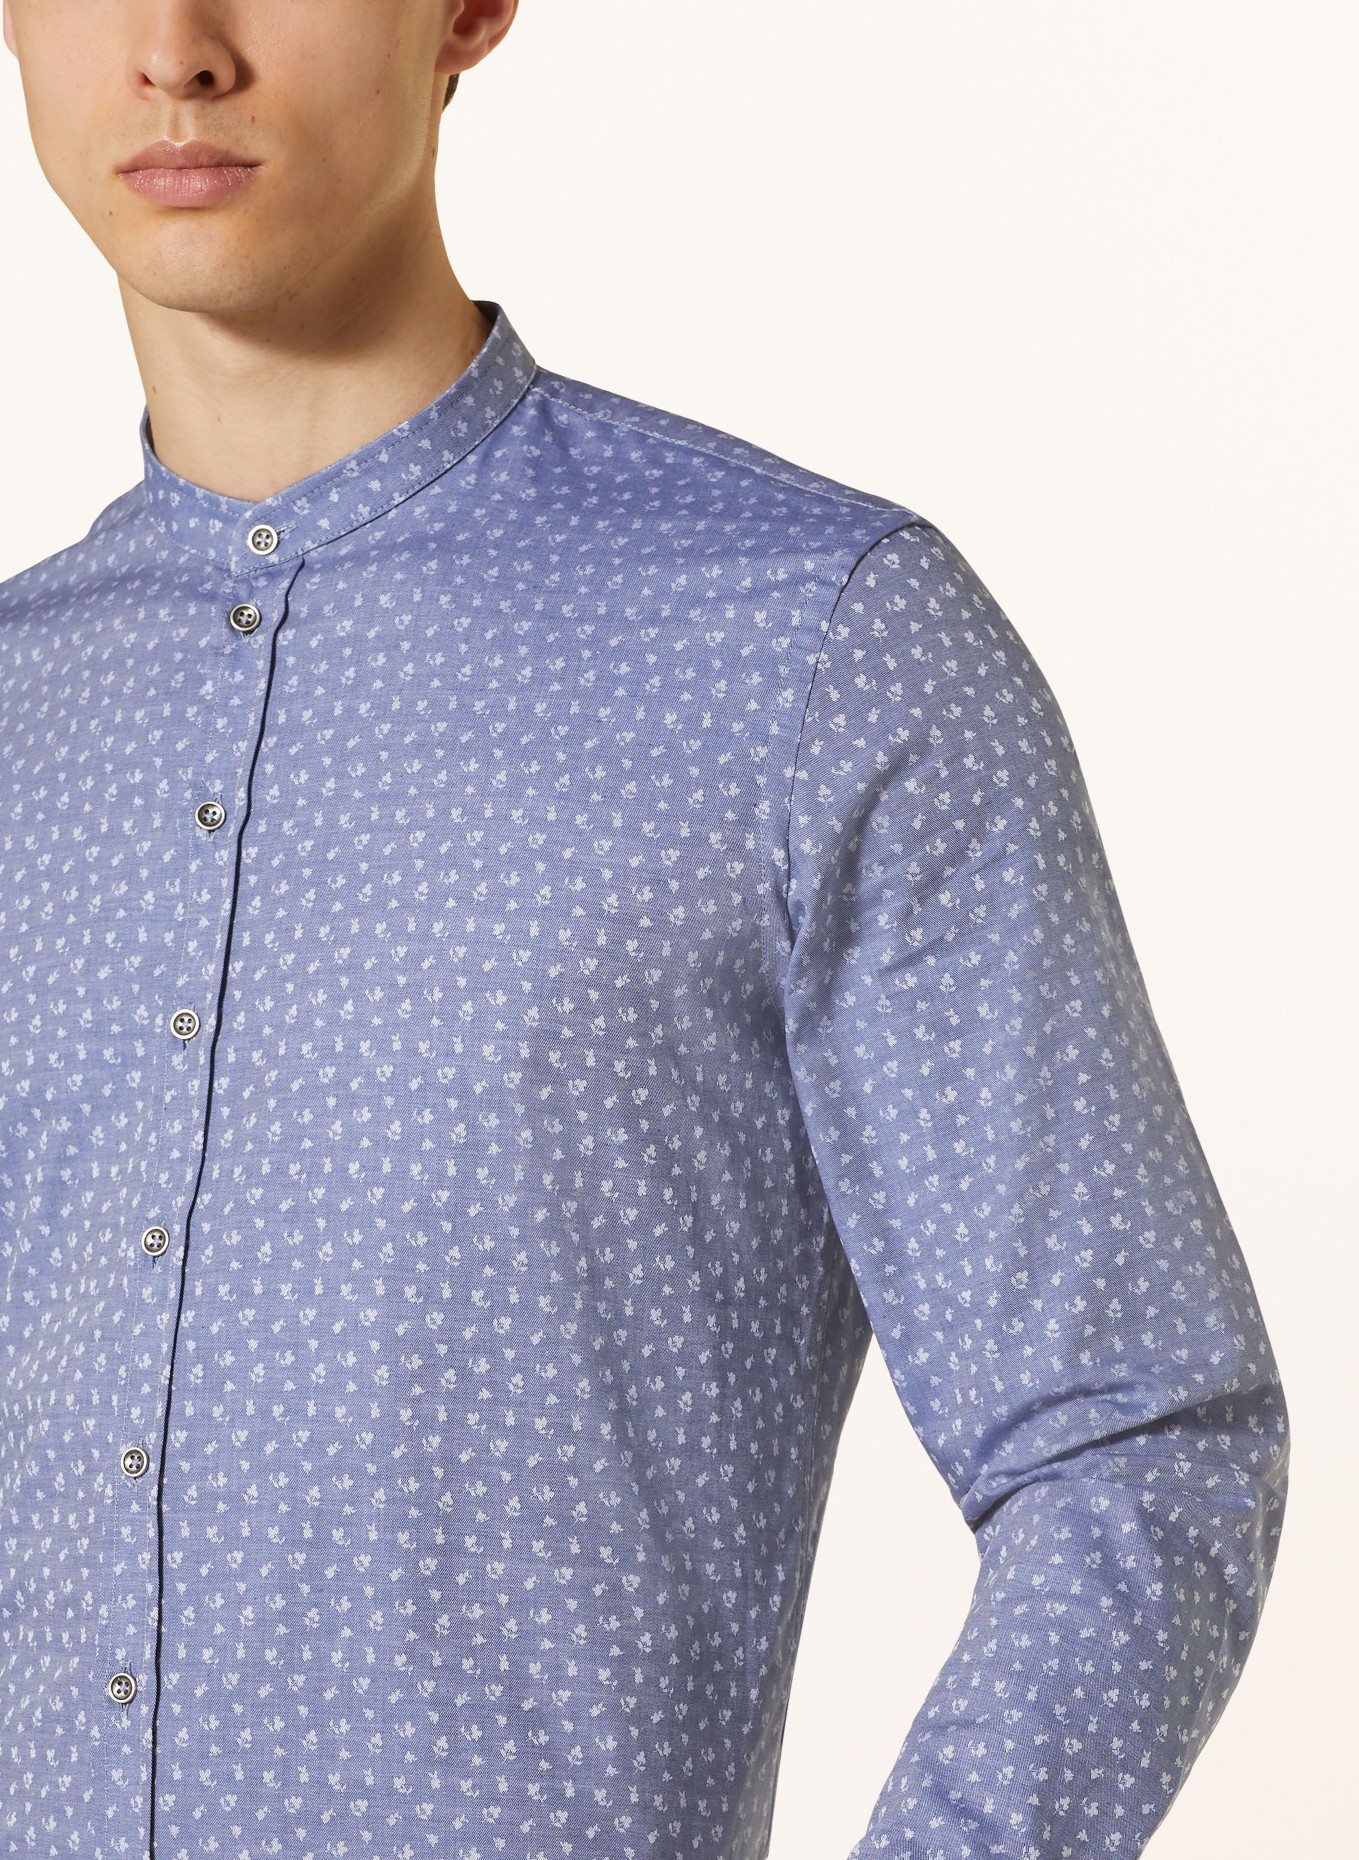 Q1 Manufaktur Shirt extra slim fit with stand-up collar, Color: BLUE (Image 4)